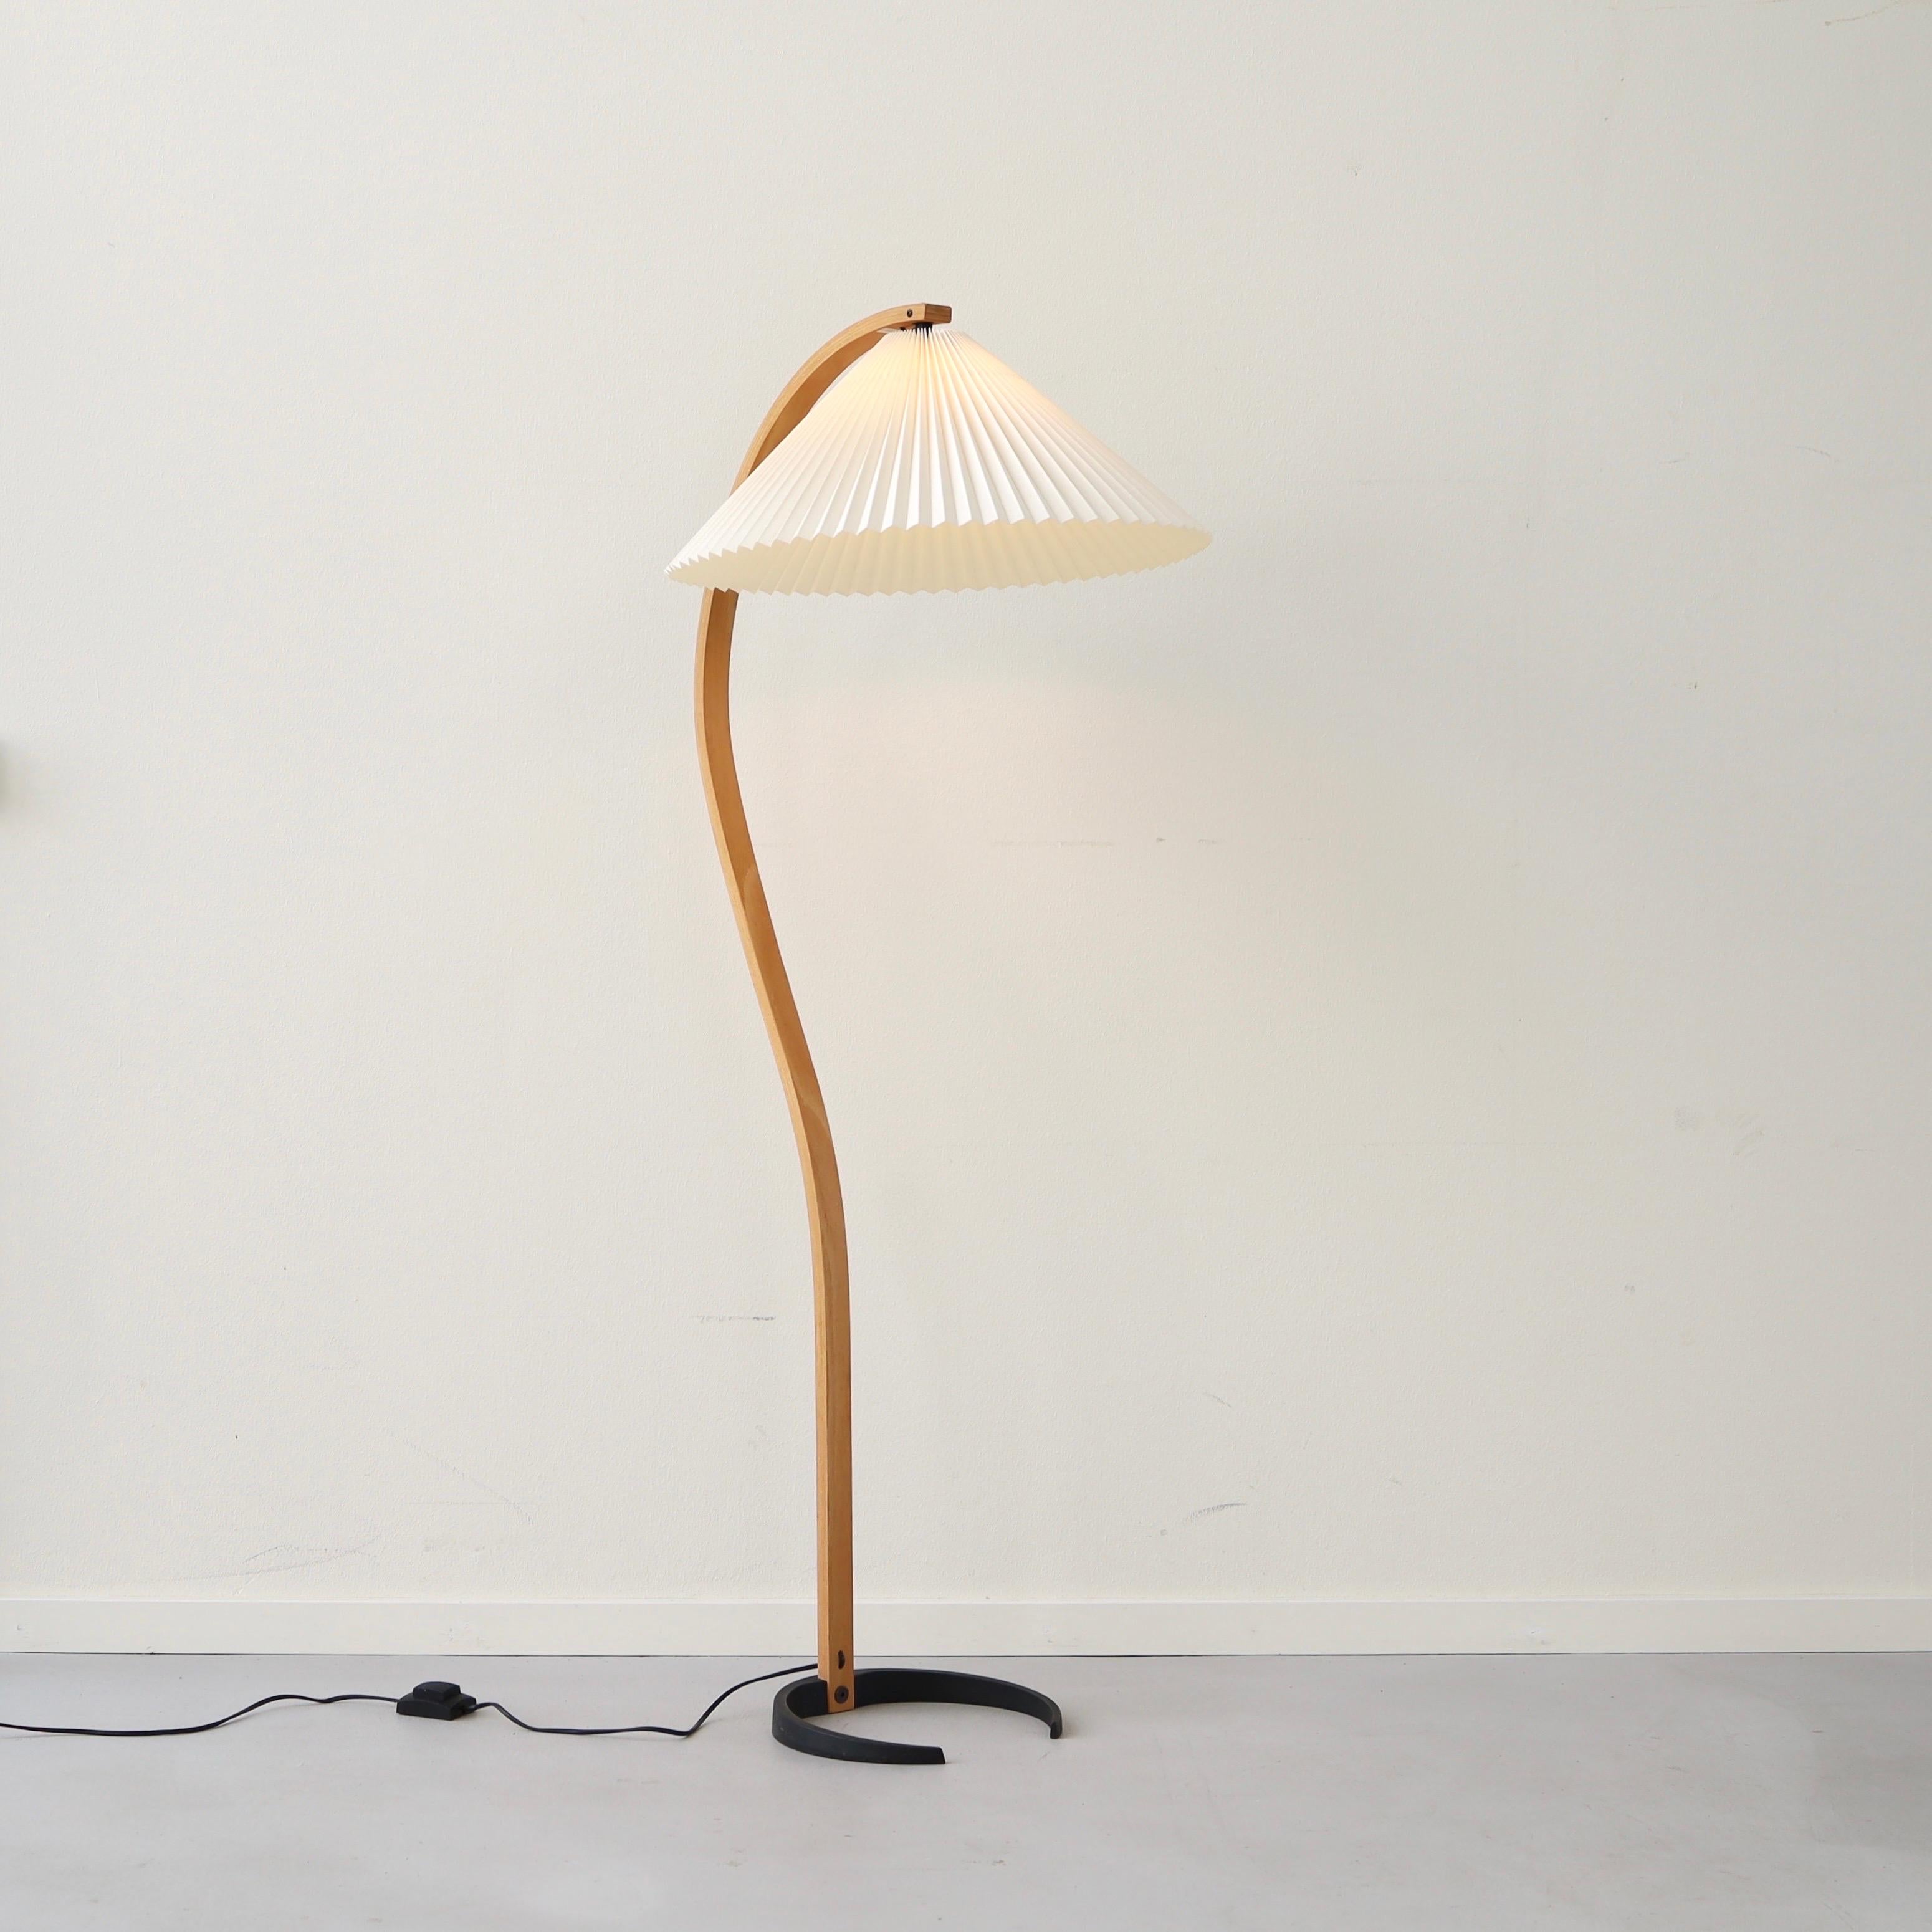 An original Danish Timberline no. 840 floor lamp by Mads Caprani. A striking timeless design perfect for any modern interior.

* A bend beech veneer floor lamp with an egg-white fabric shade
* Style: 840
* Manufacturer: Caprani Light A/S Denmark 
*